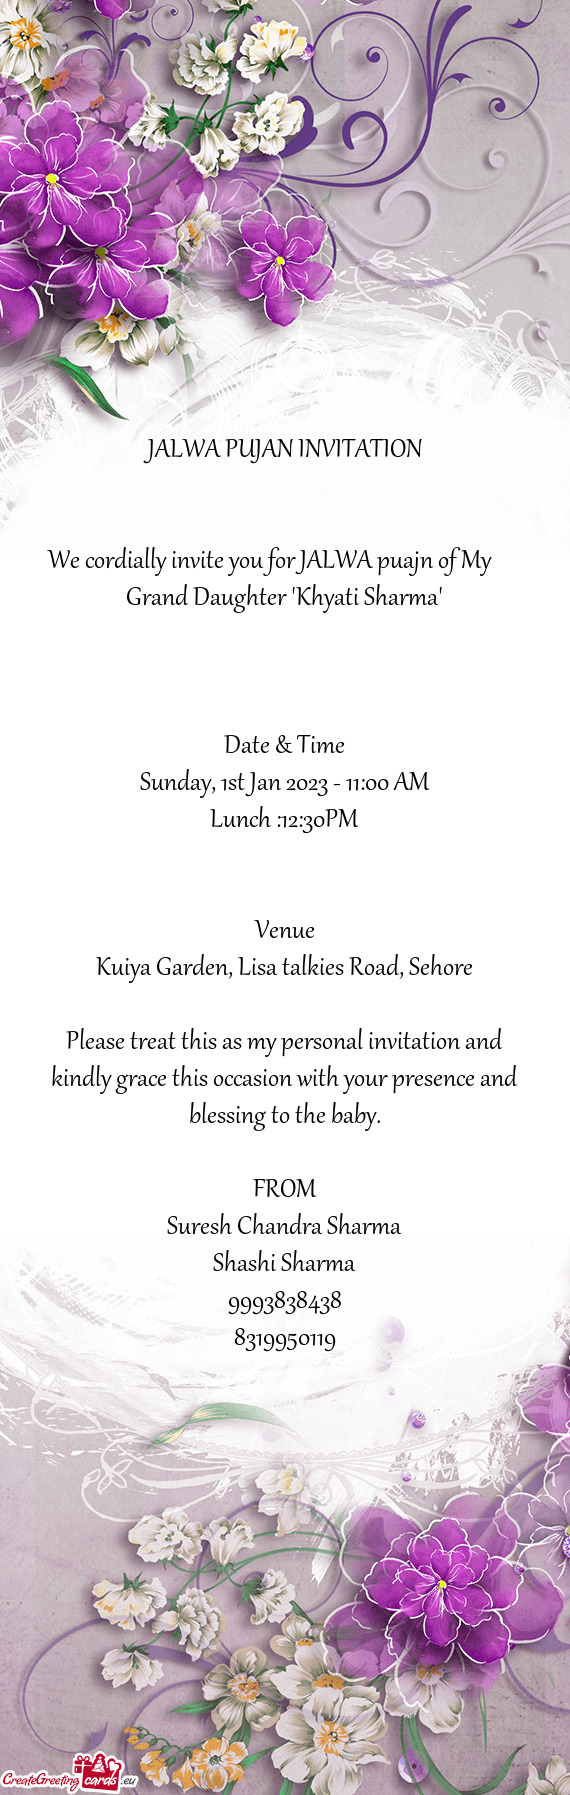 We cordially invite you for JALWA puajn of My  Grand Daughter "Khyati Sharma"